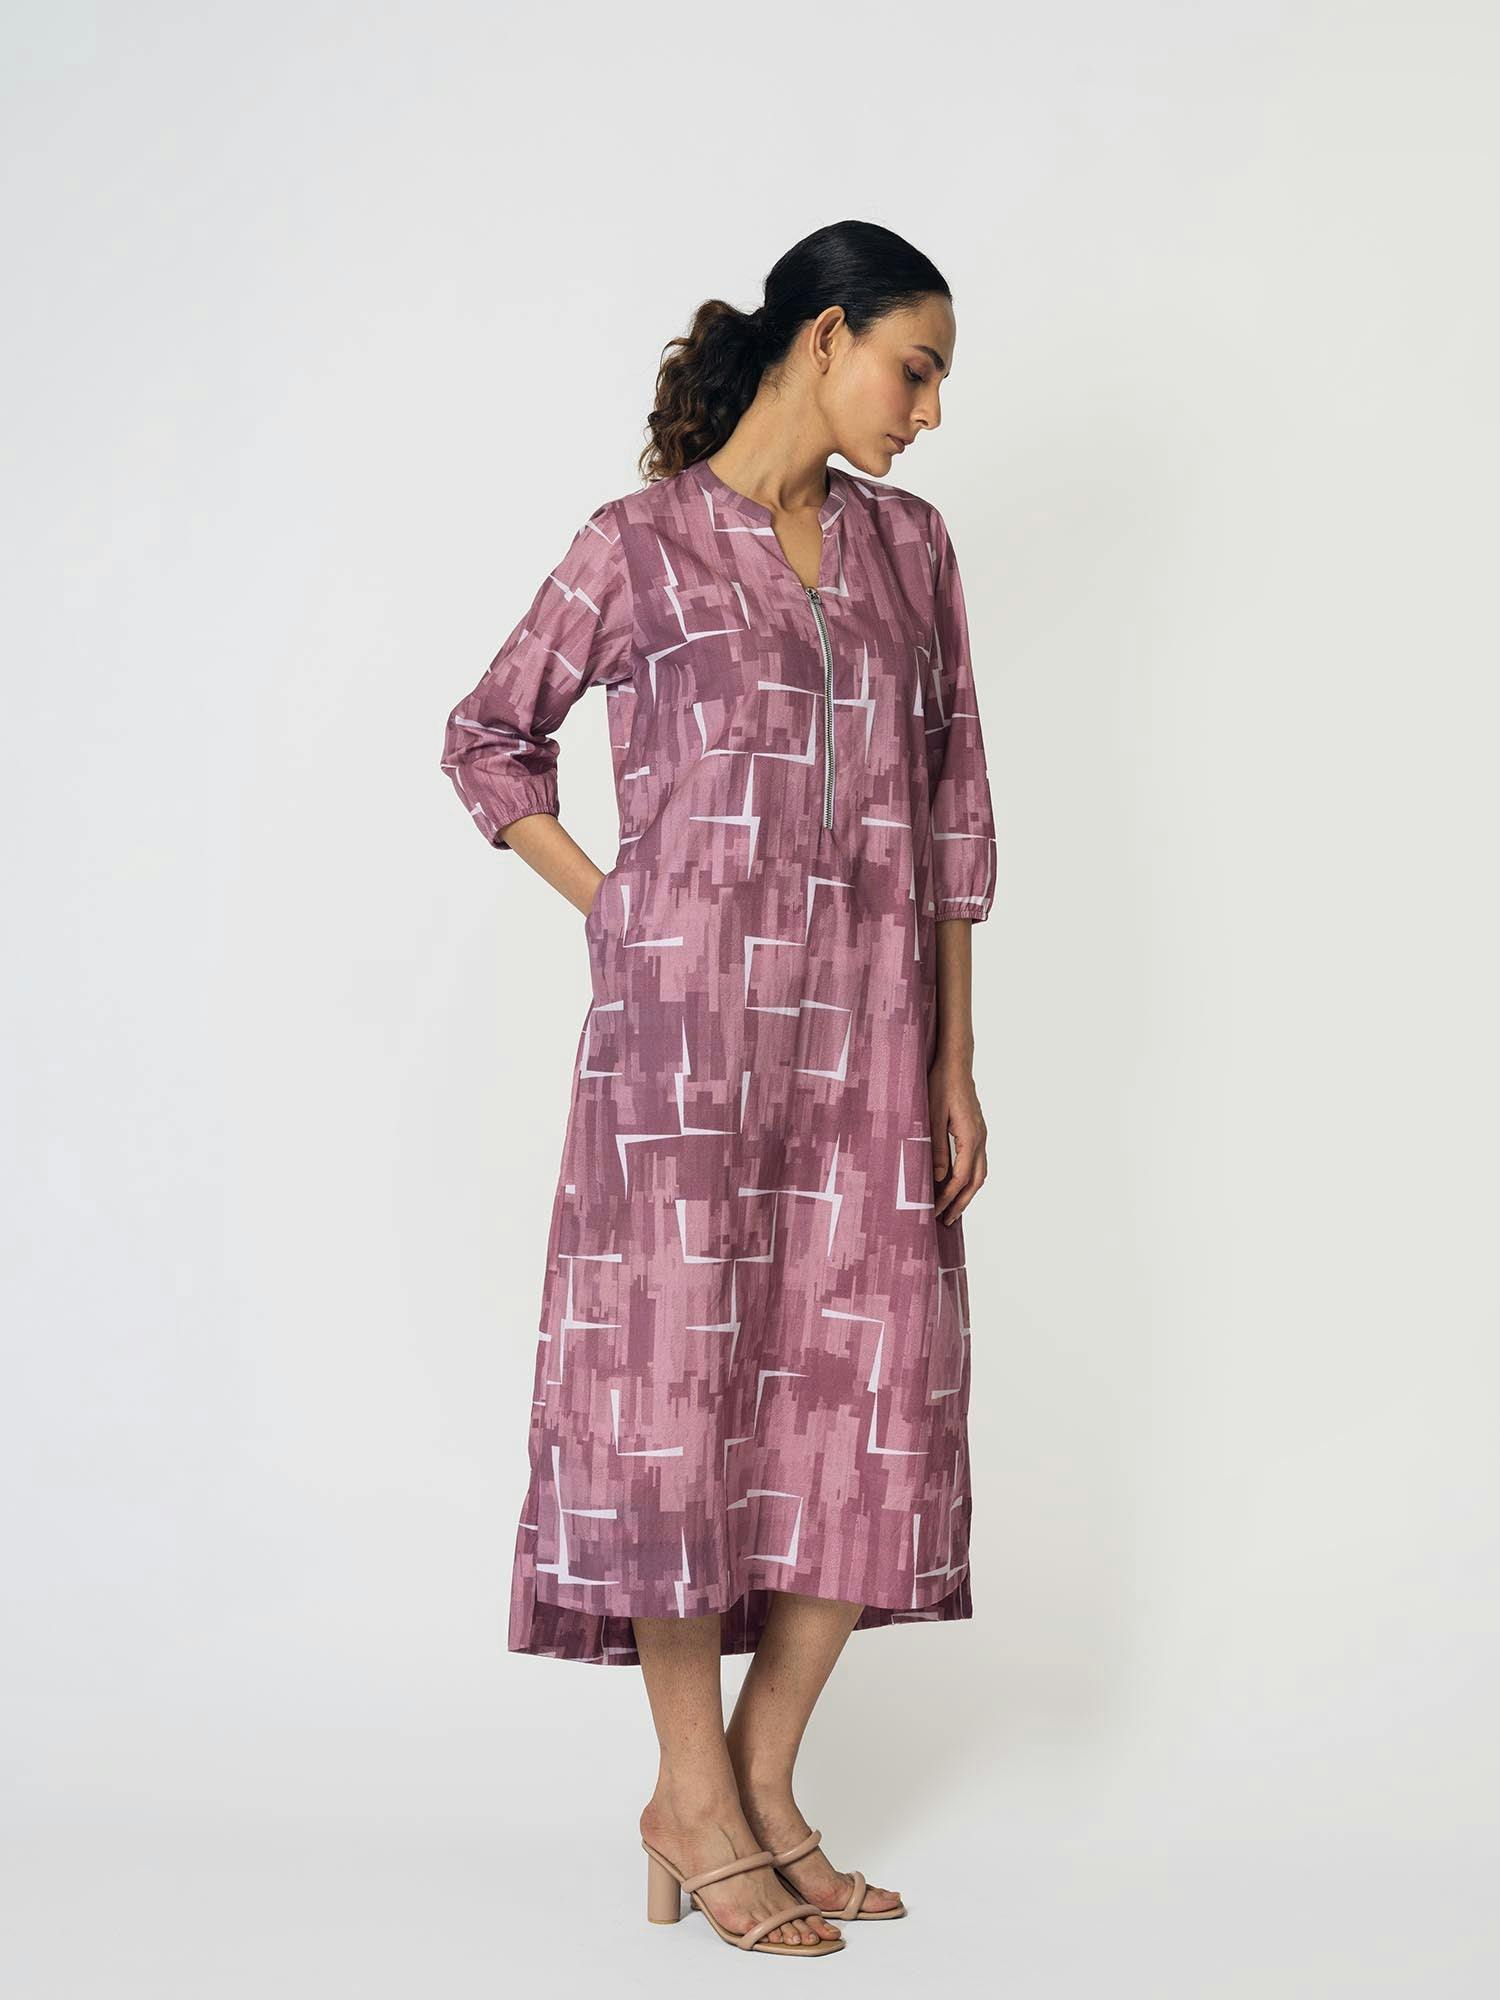 Brick Onion Pink Dress with Zipper, a product by KLAD